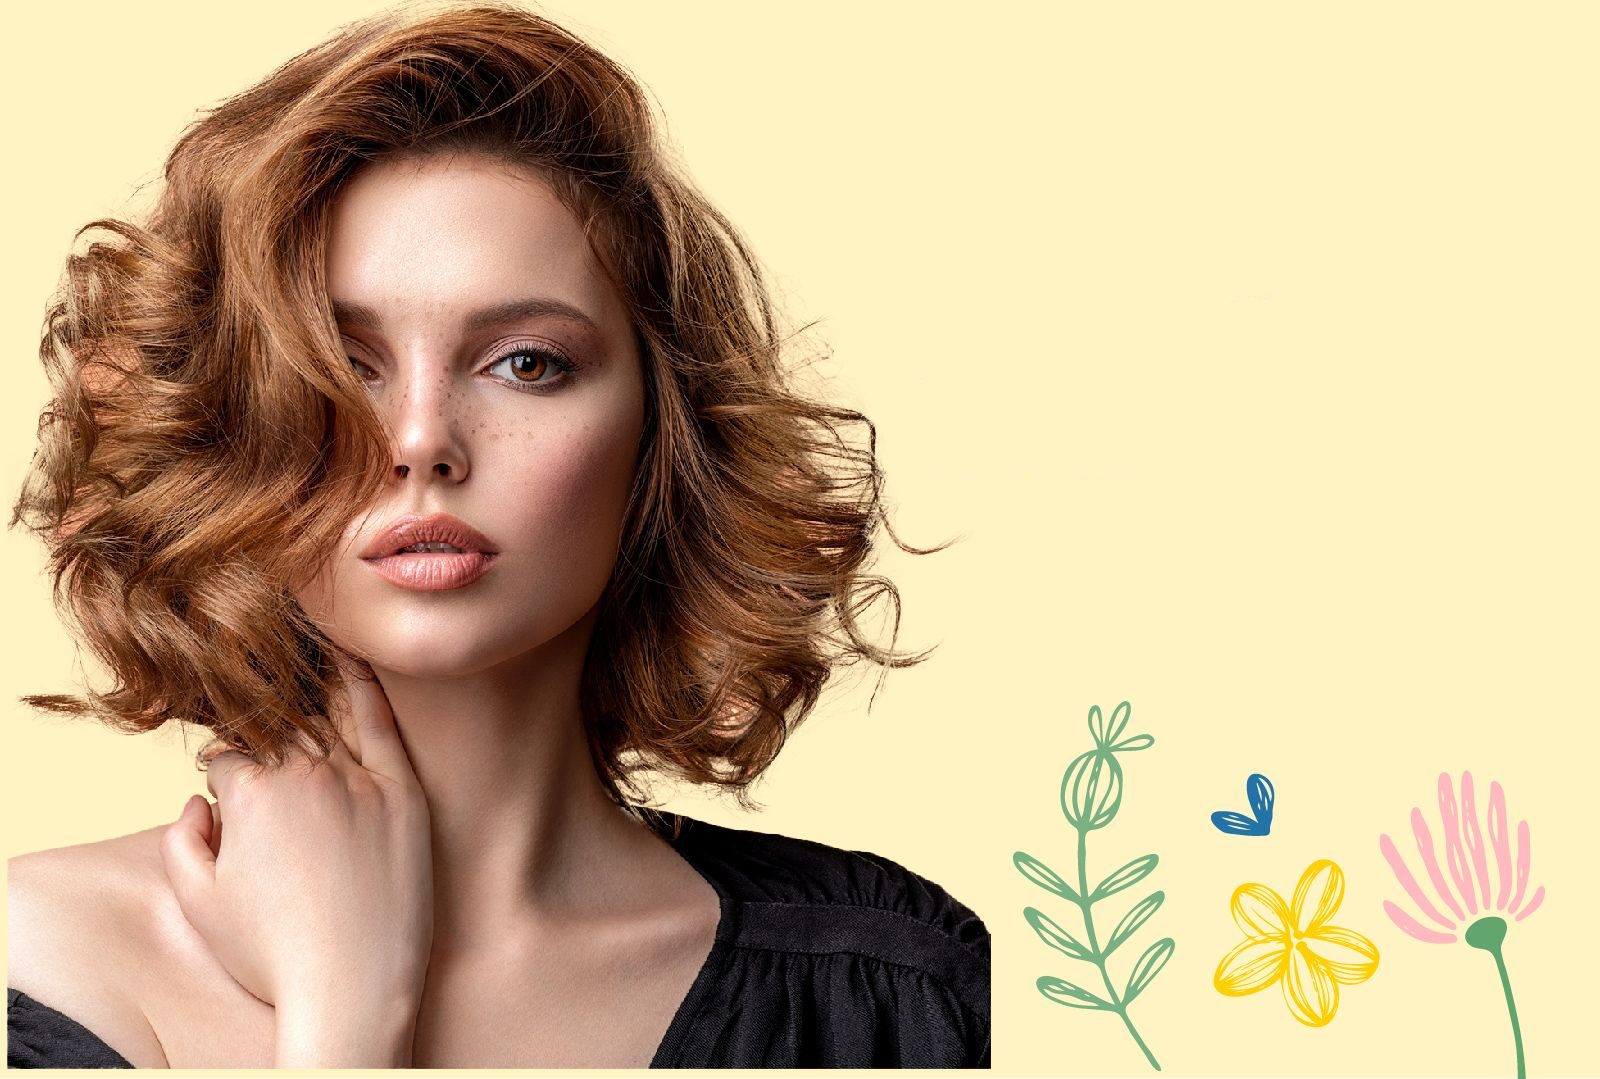 Woman with stylish hair style and decorative flowers